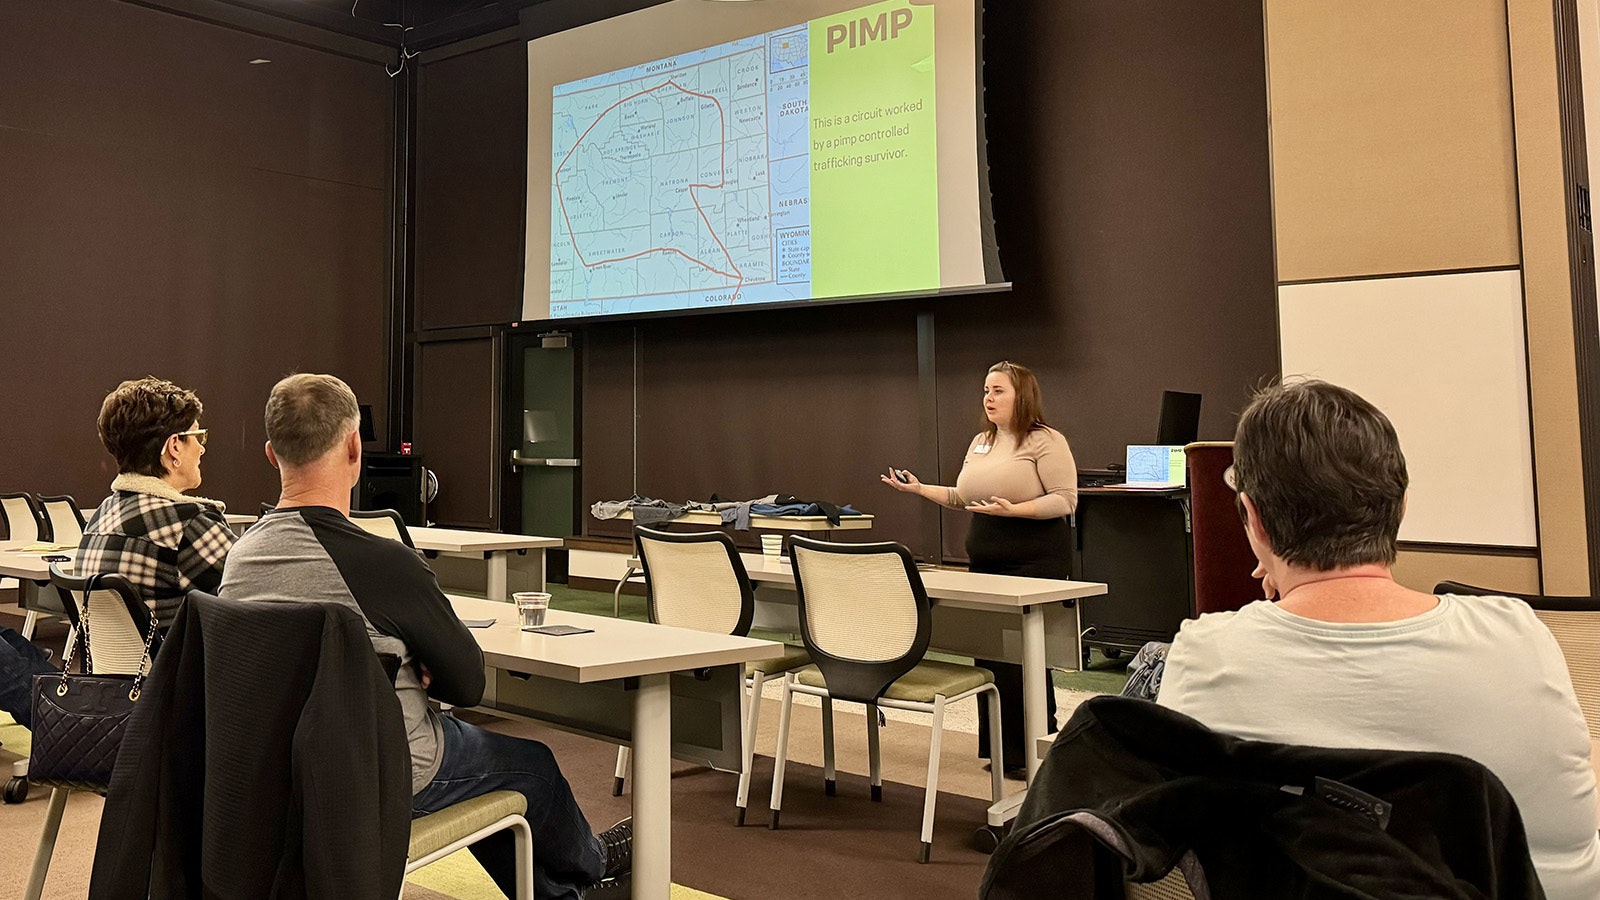 Terri Markham explains the concept of "pimping" in human trafficking. The slide on the screen shows a route used by sex workers, victims of human trafficking, who moved throughout Wyoming as part of a pimp-controlled trafficking business.